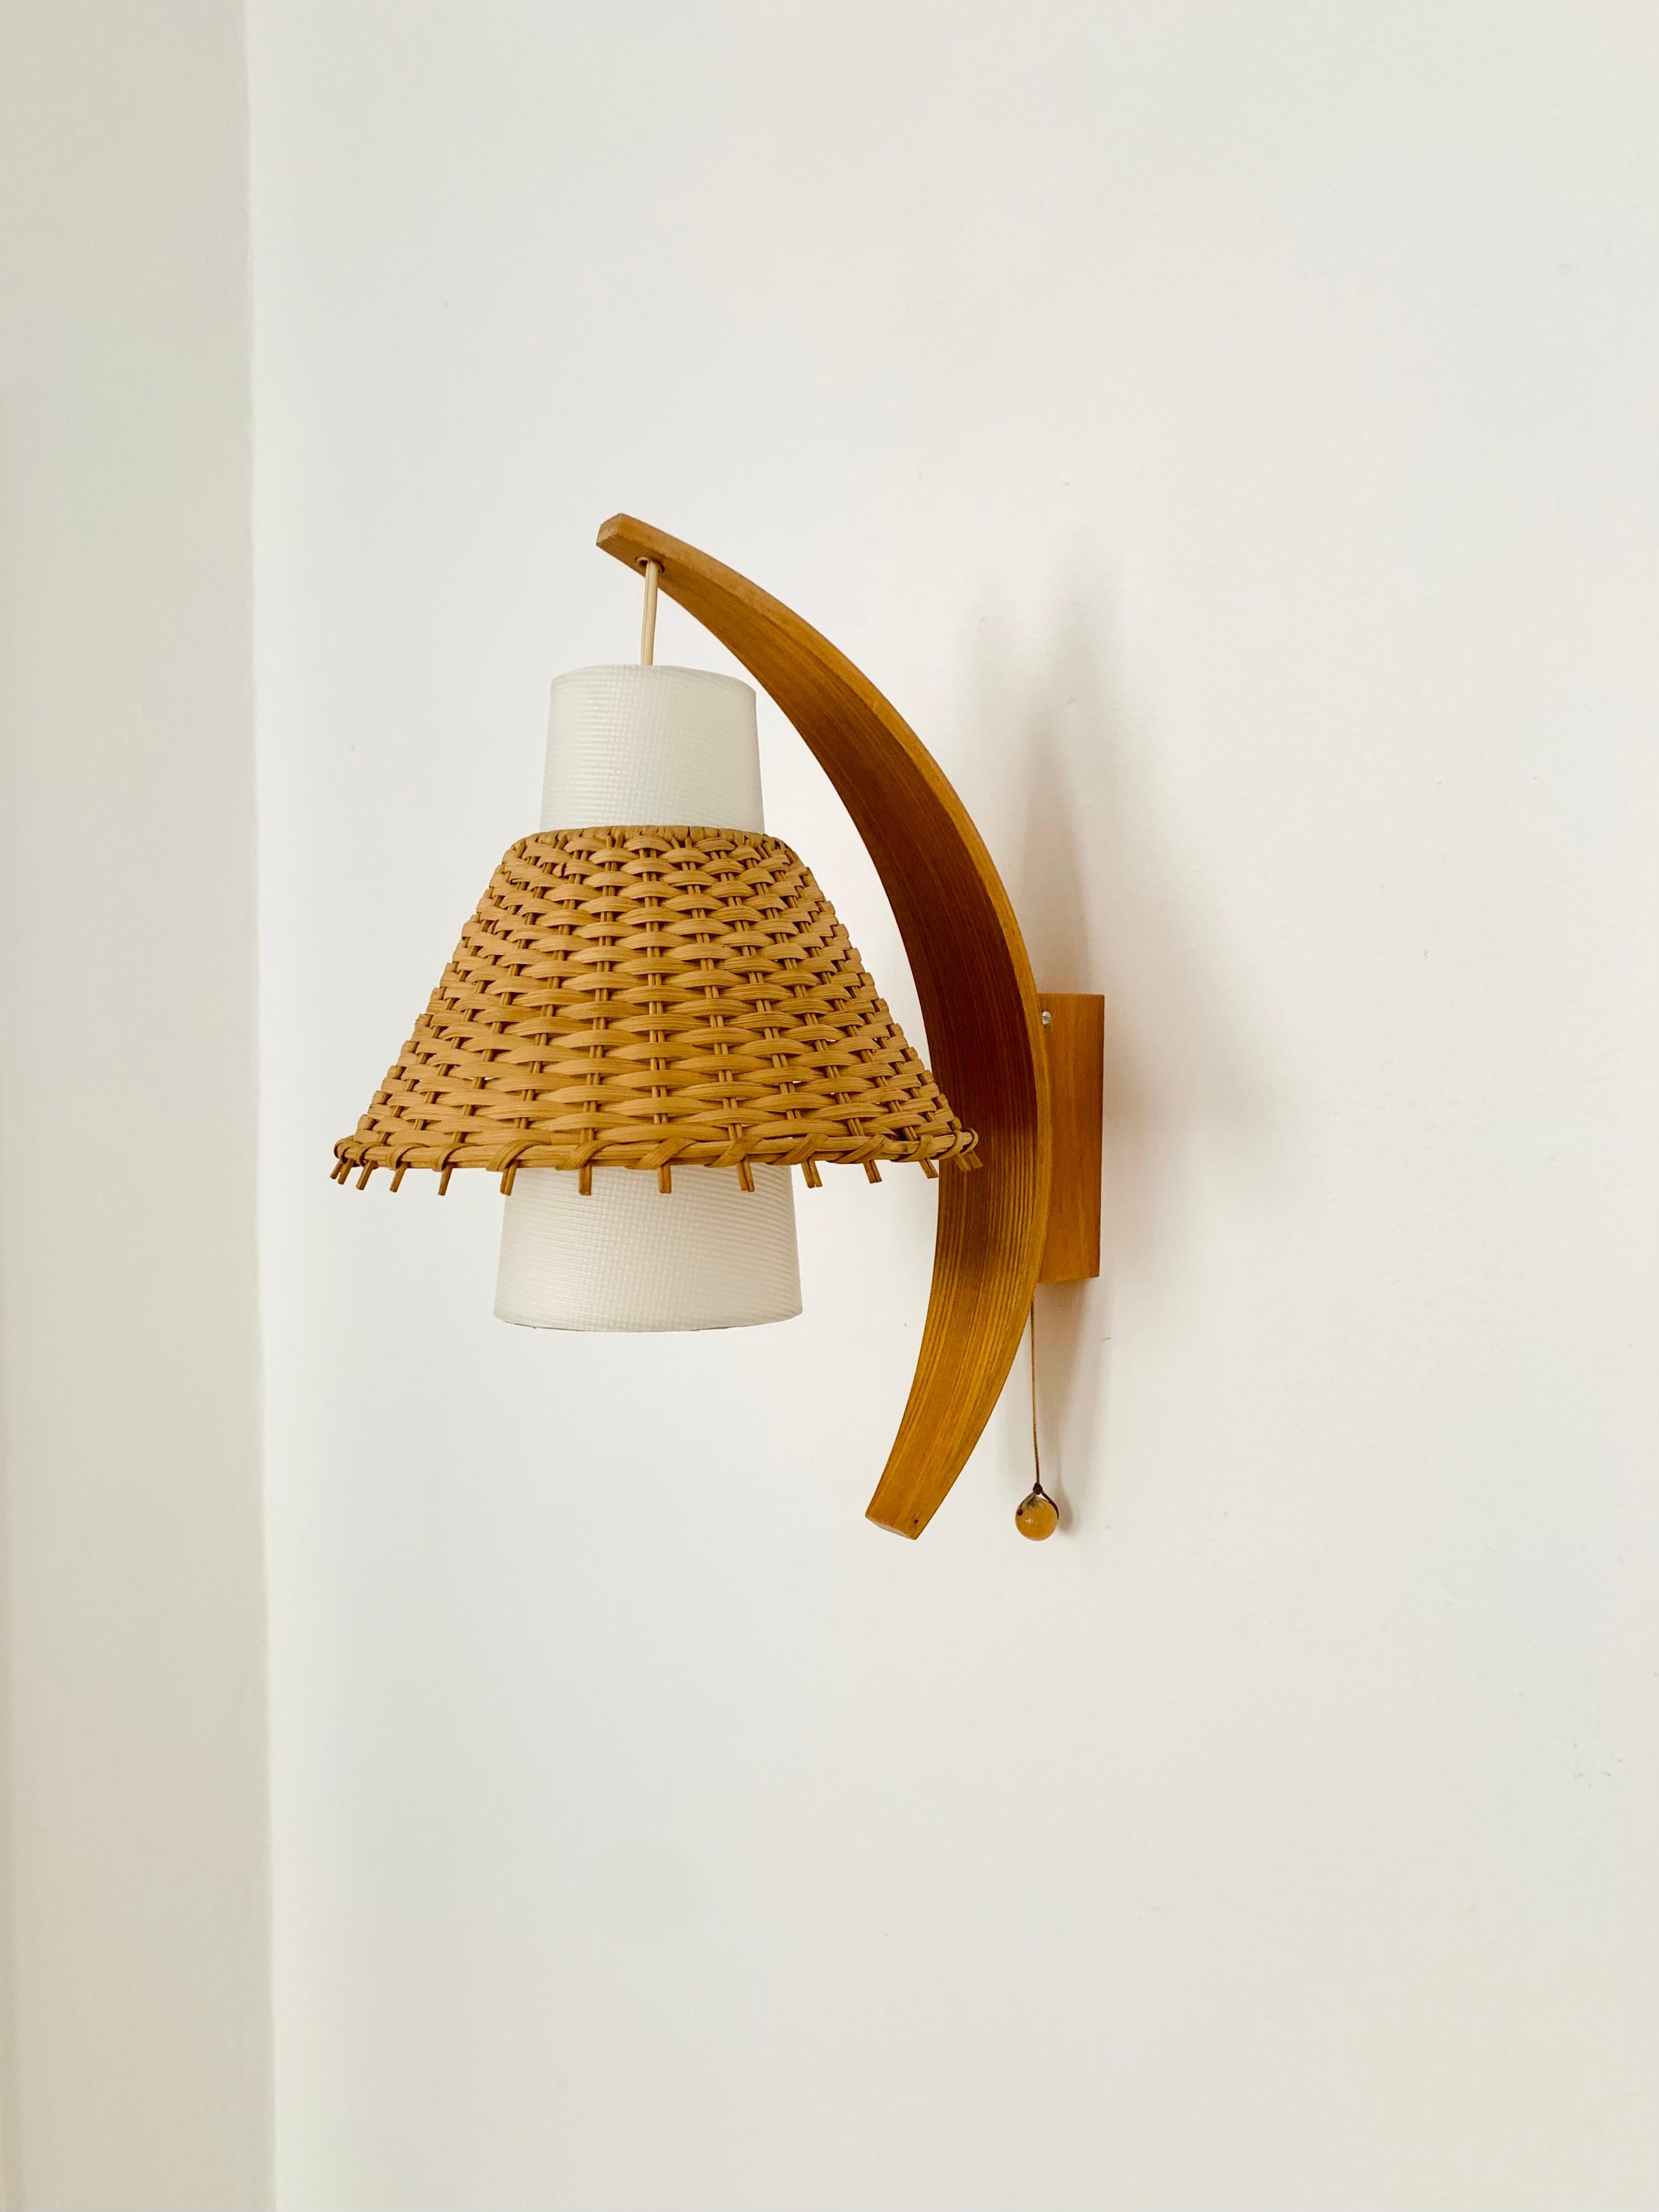 Beautiful wall lamp from the 1950s.
Great and unusual design with a fantastically comfortable look.
Very nice details and loving processing.
A cozy light is created.

Condition:

Very good vintage condition with slight signs of wear